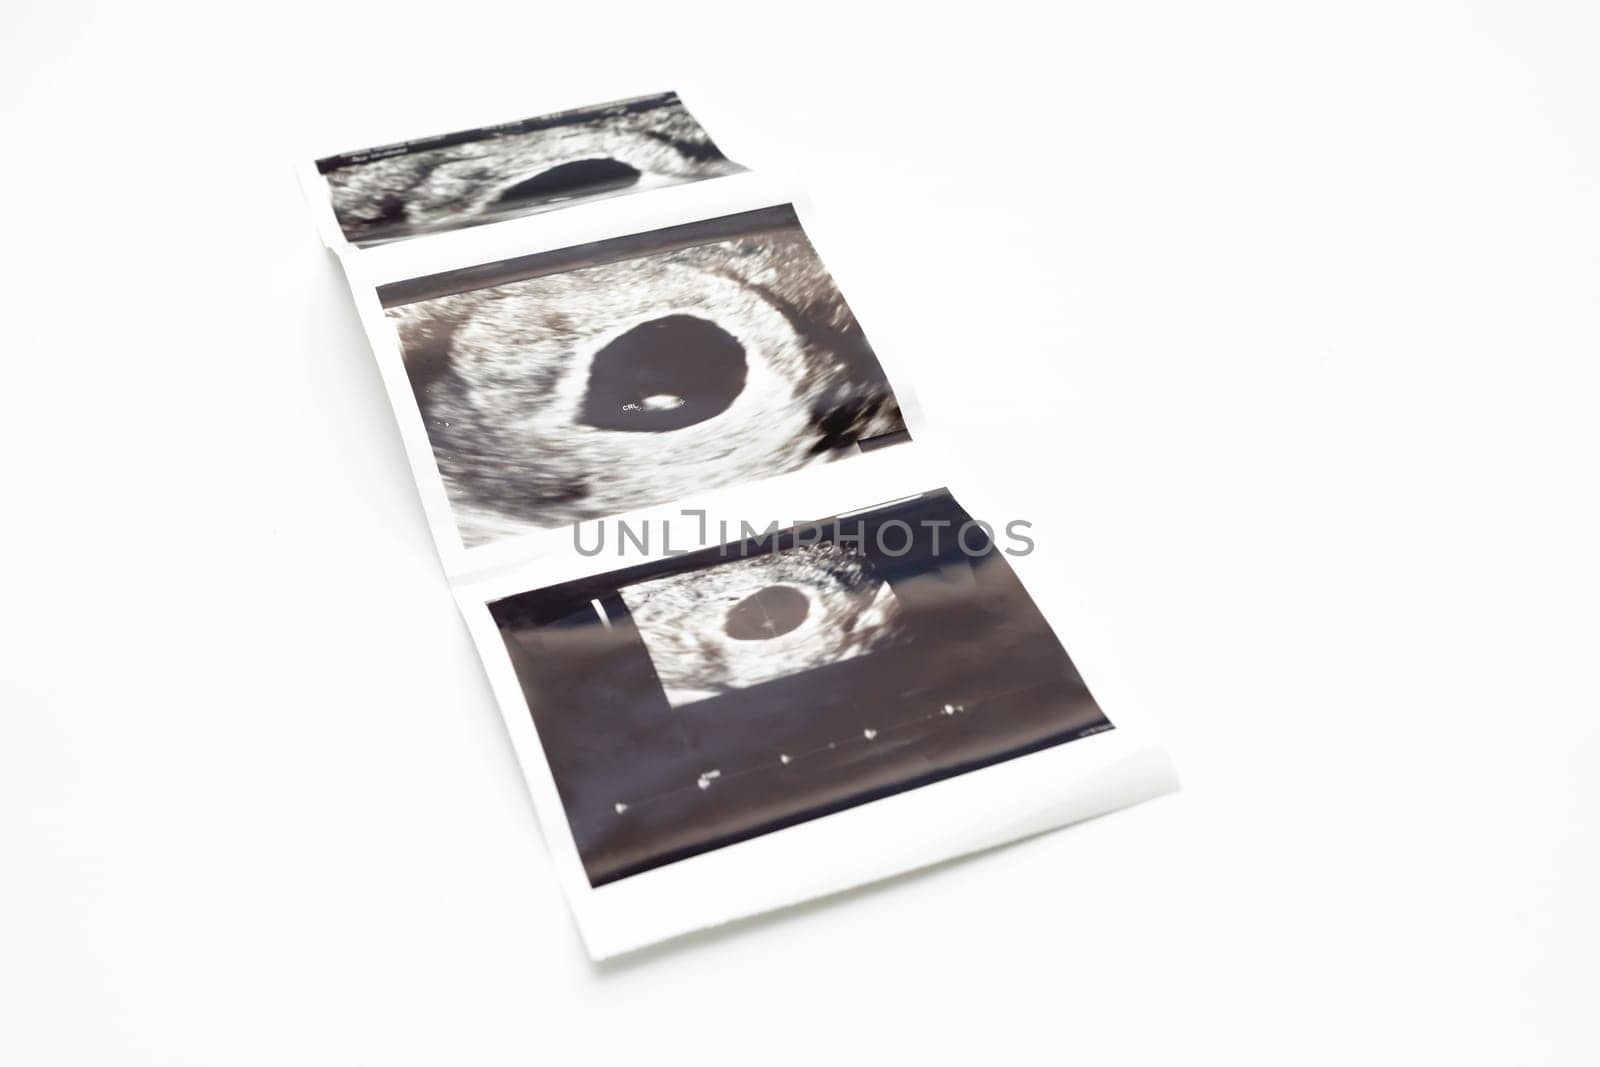 Ultrasound Picture Of 6 Weeks Fetus of Pregnant Woman, Embryo Image On White Background. Selective Focus. Fetus Development, Pregnancy Health Checking. Maternity, Horizontal Plane